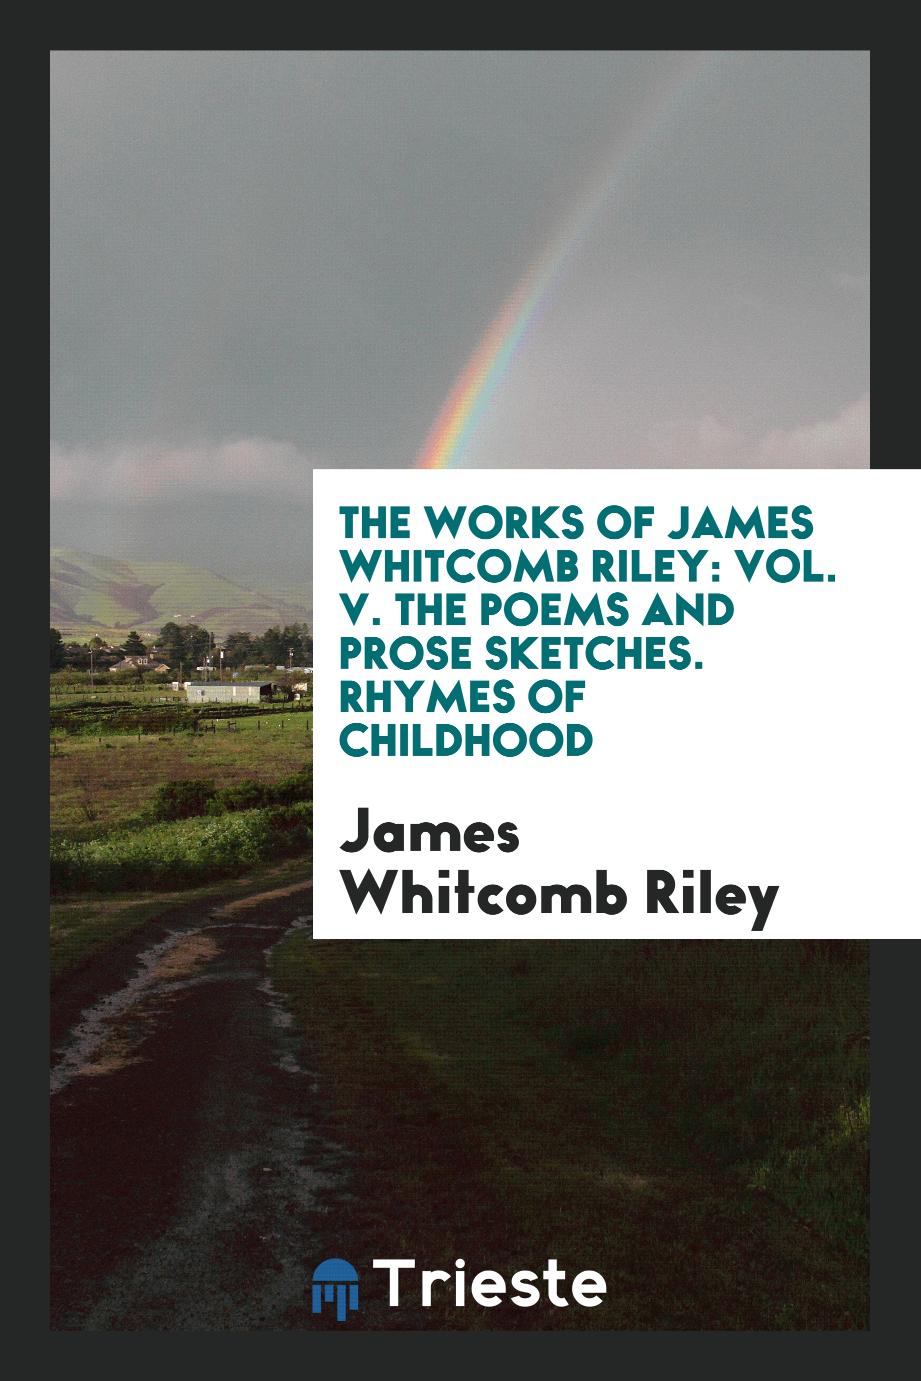 The Works of James Whitcomb Riley: Vol. V. The Poems and Prose Sketches. Rhymes of Childhood